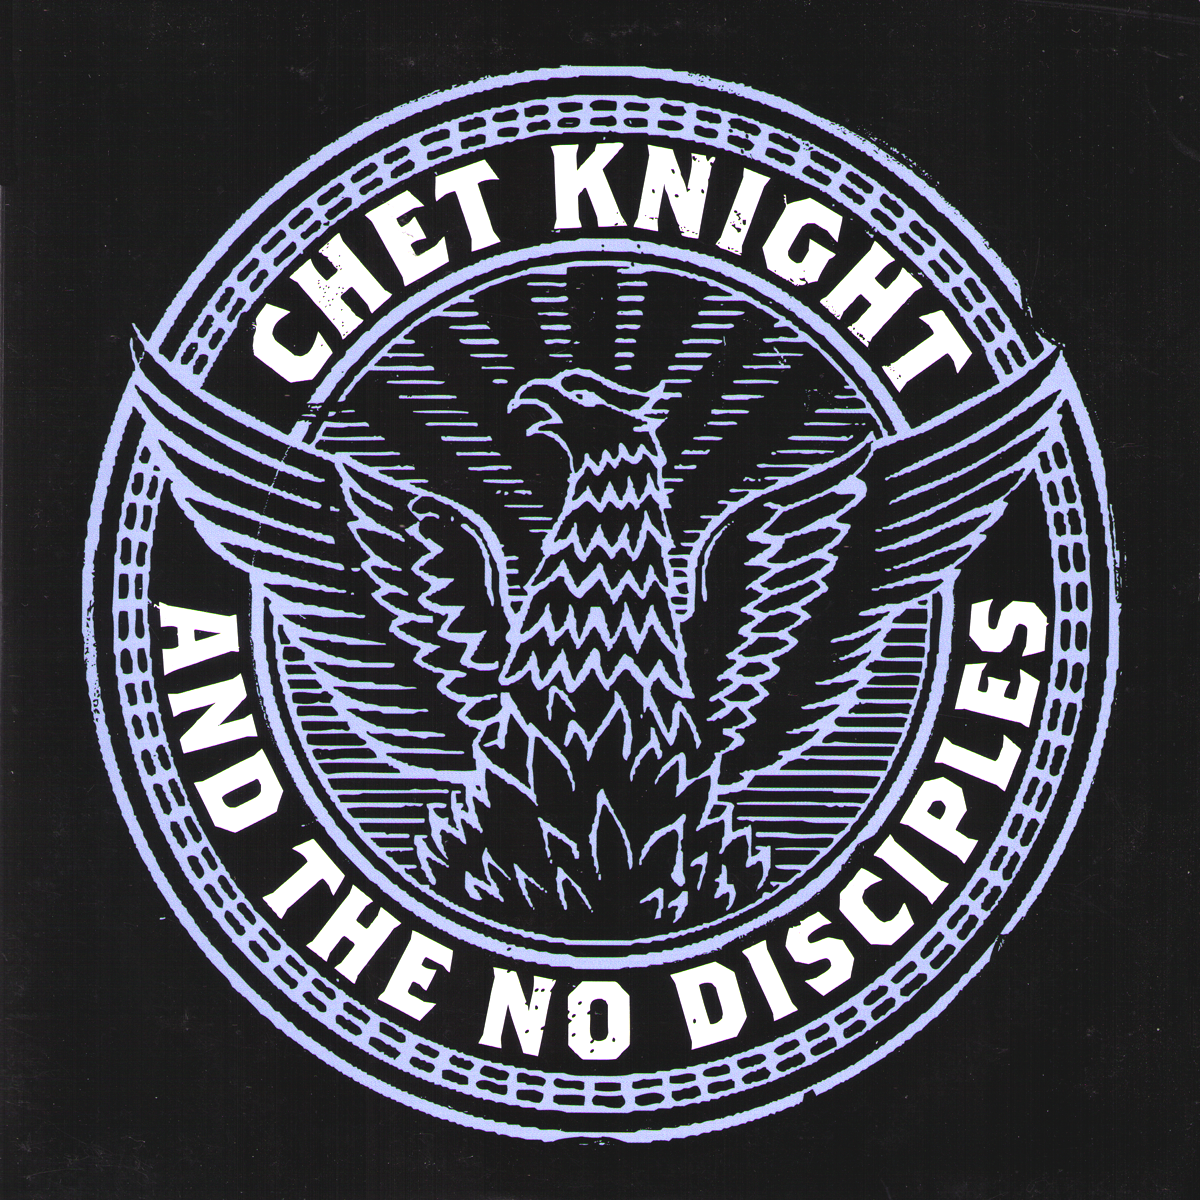 Chet Knight And The No Disciples- S/T 7” ~EX BITERS / TEMPLARS!